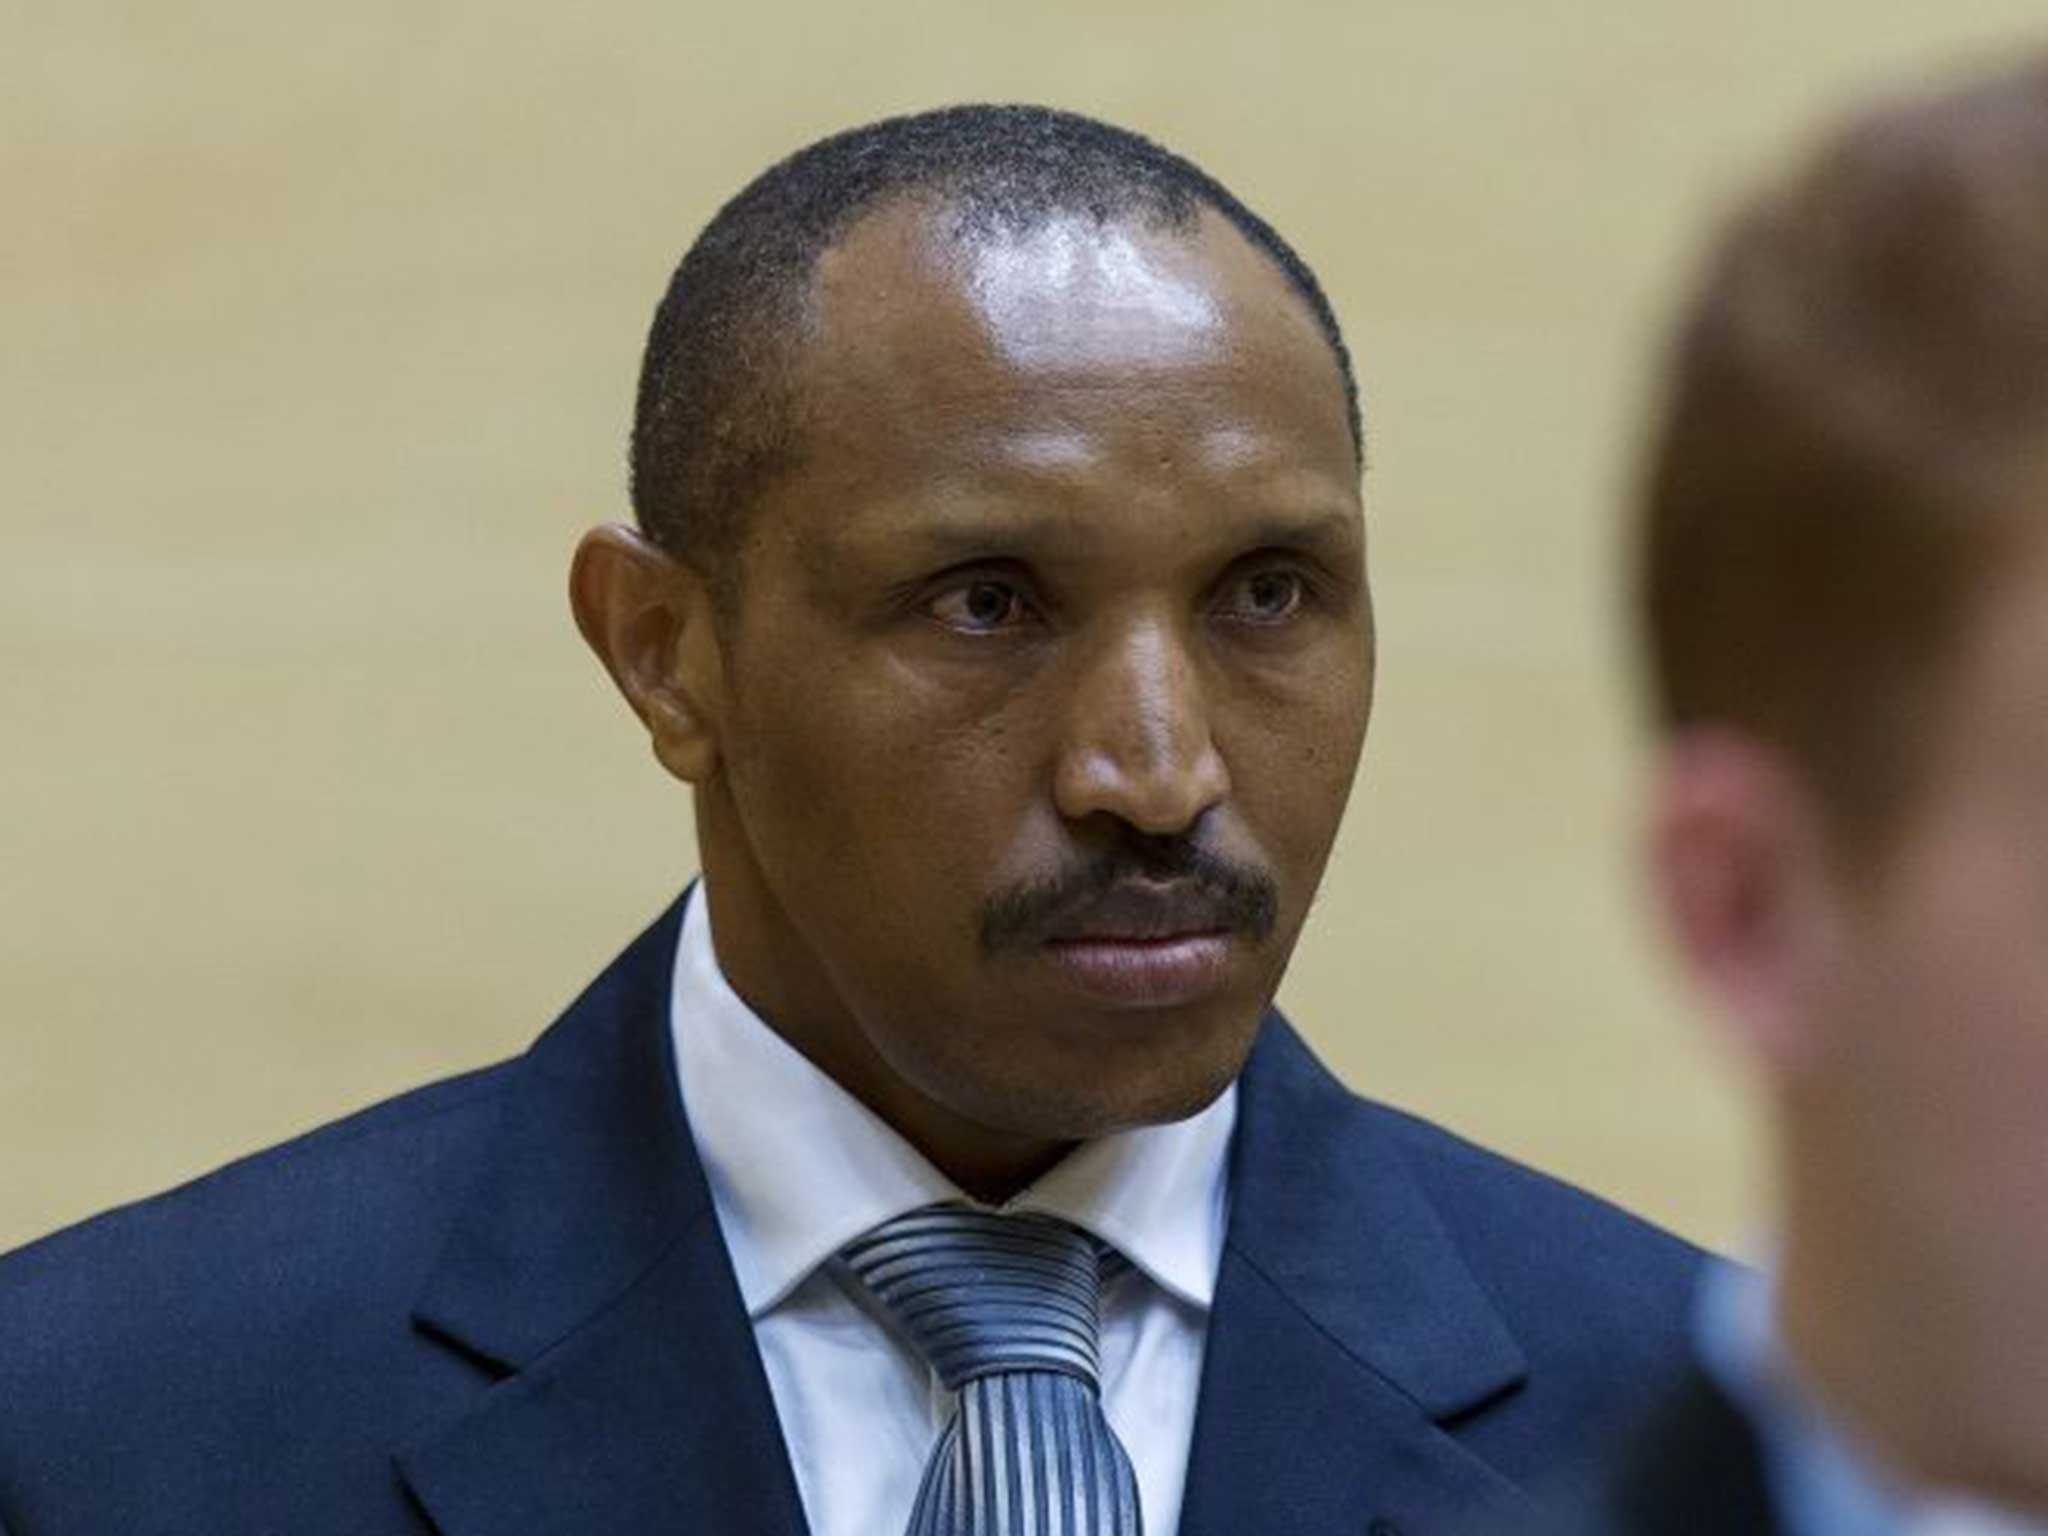 Bosco Ntaganda in the Hague. He stands accused of multiple counts of war crimes